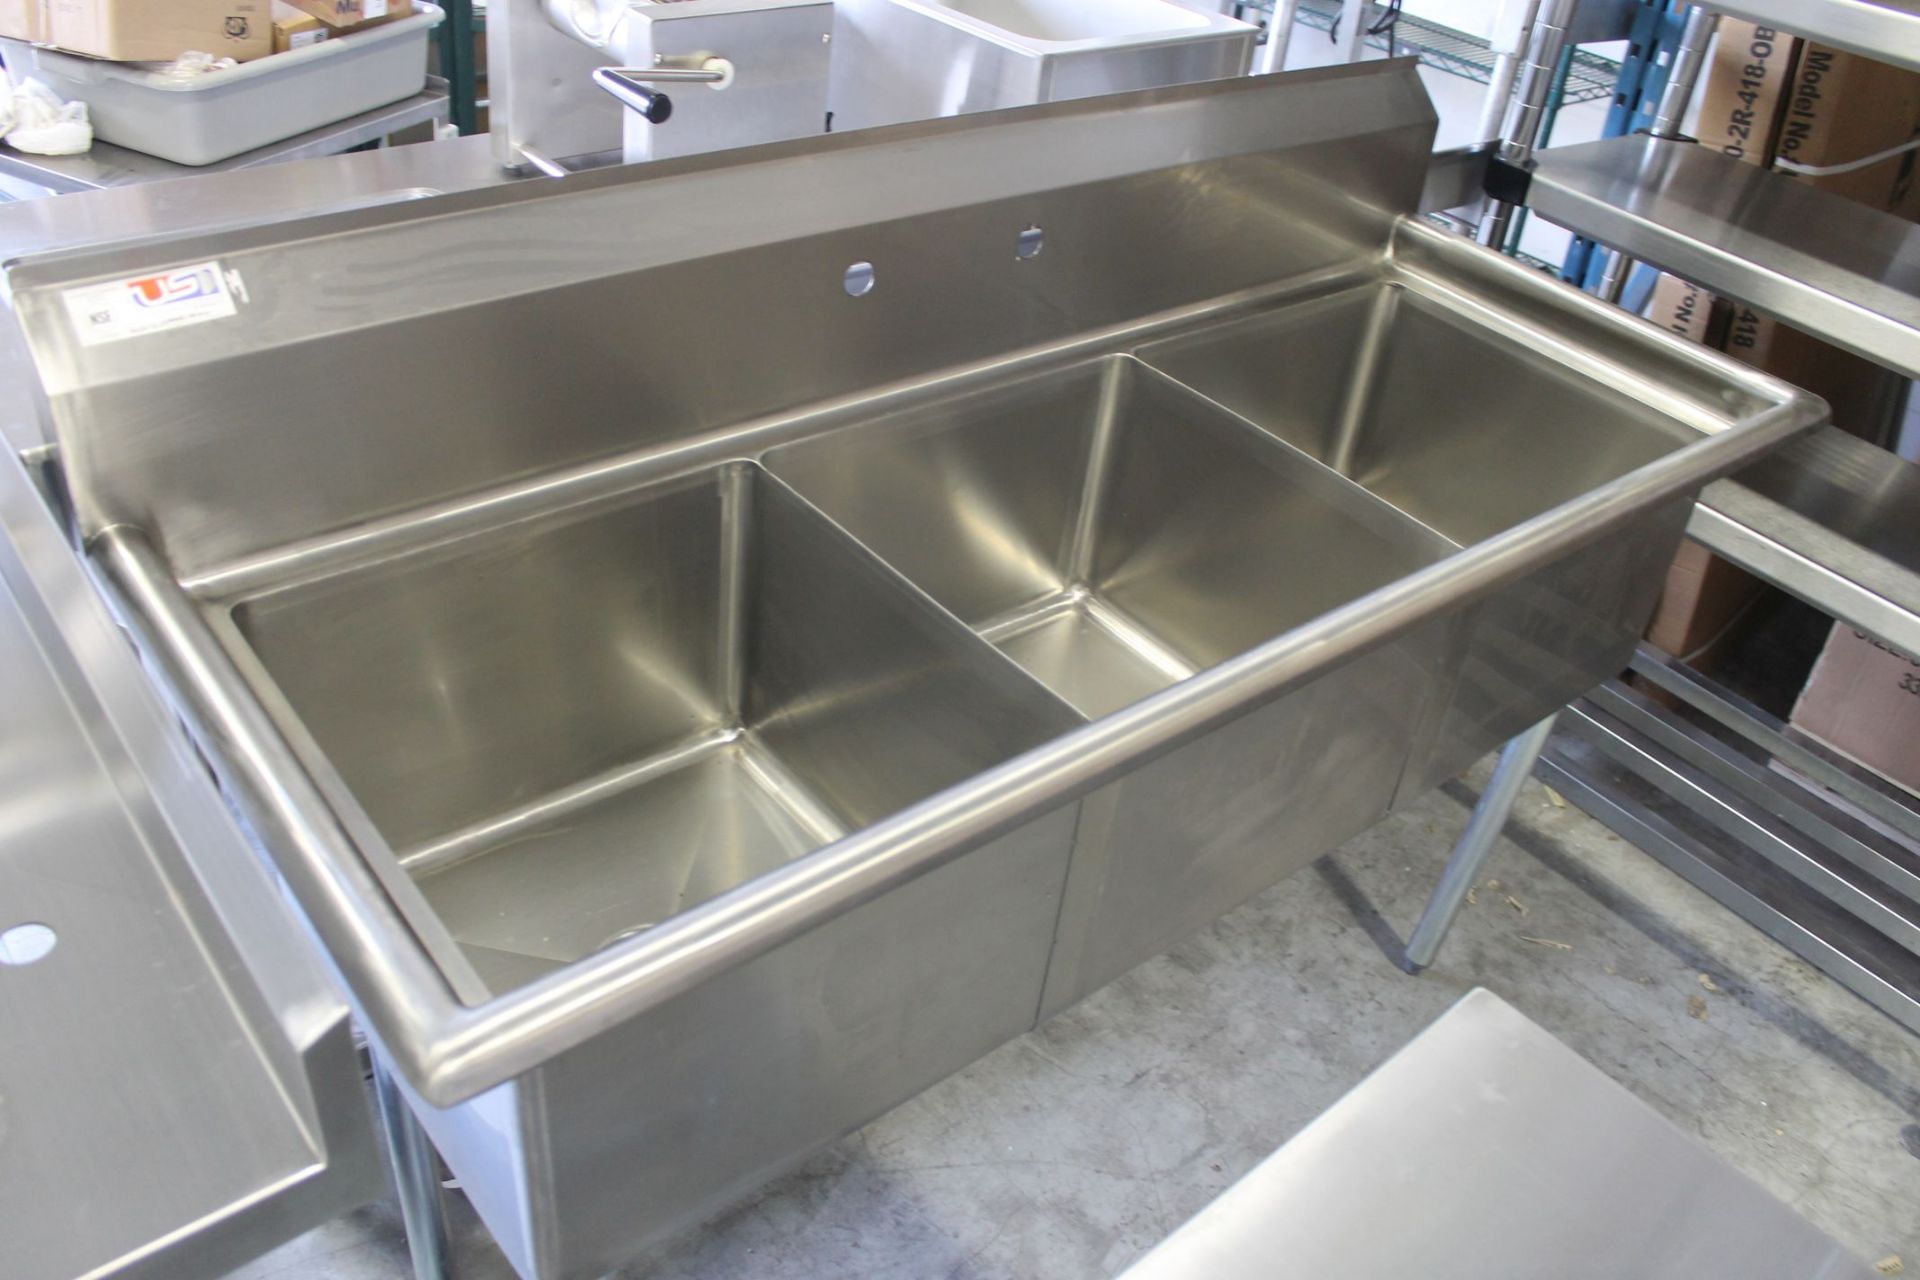 3 Compartment Prep Sink No Drainboard, Overall Dims 29.5"X77"X43.75"